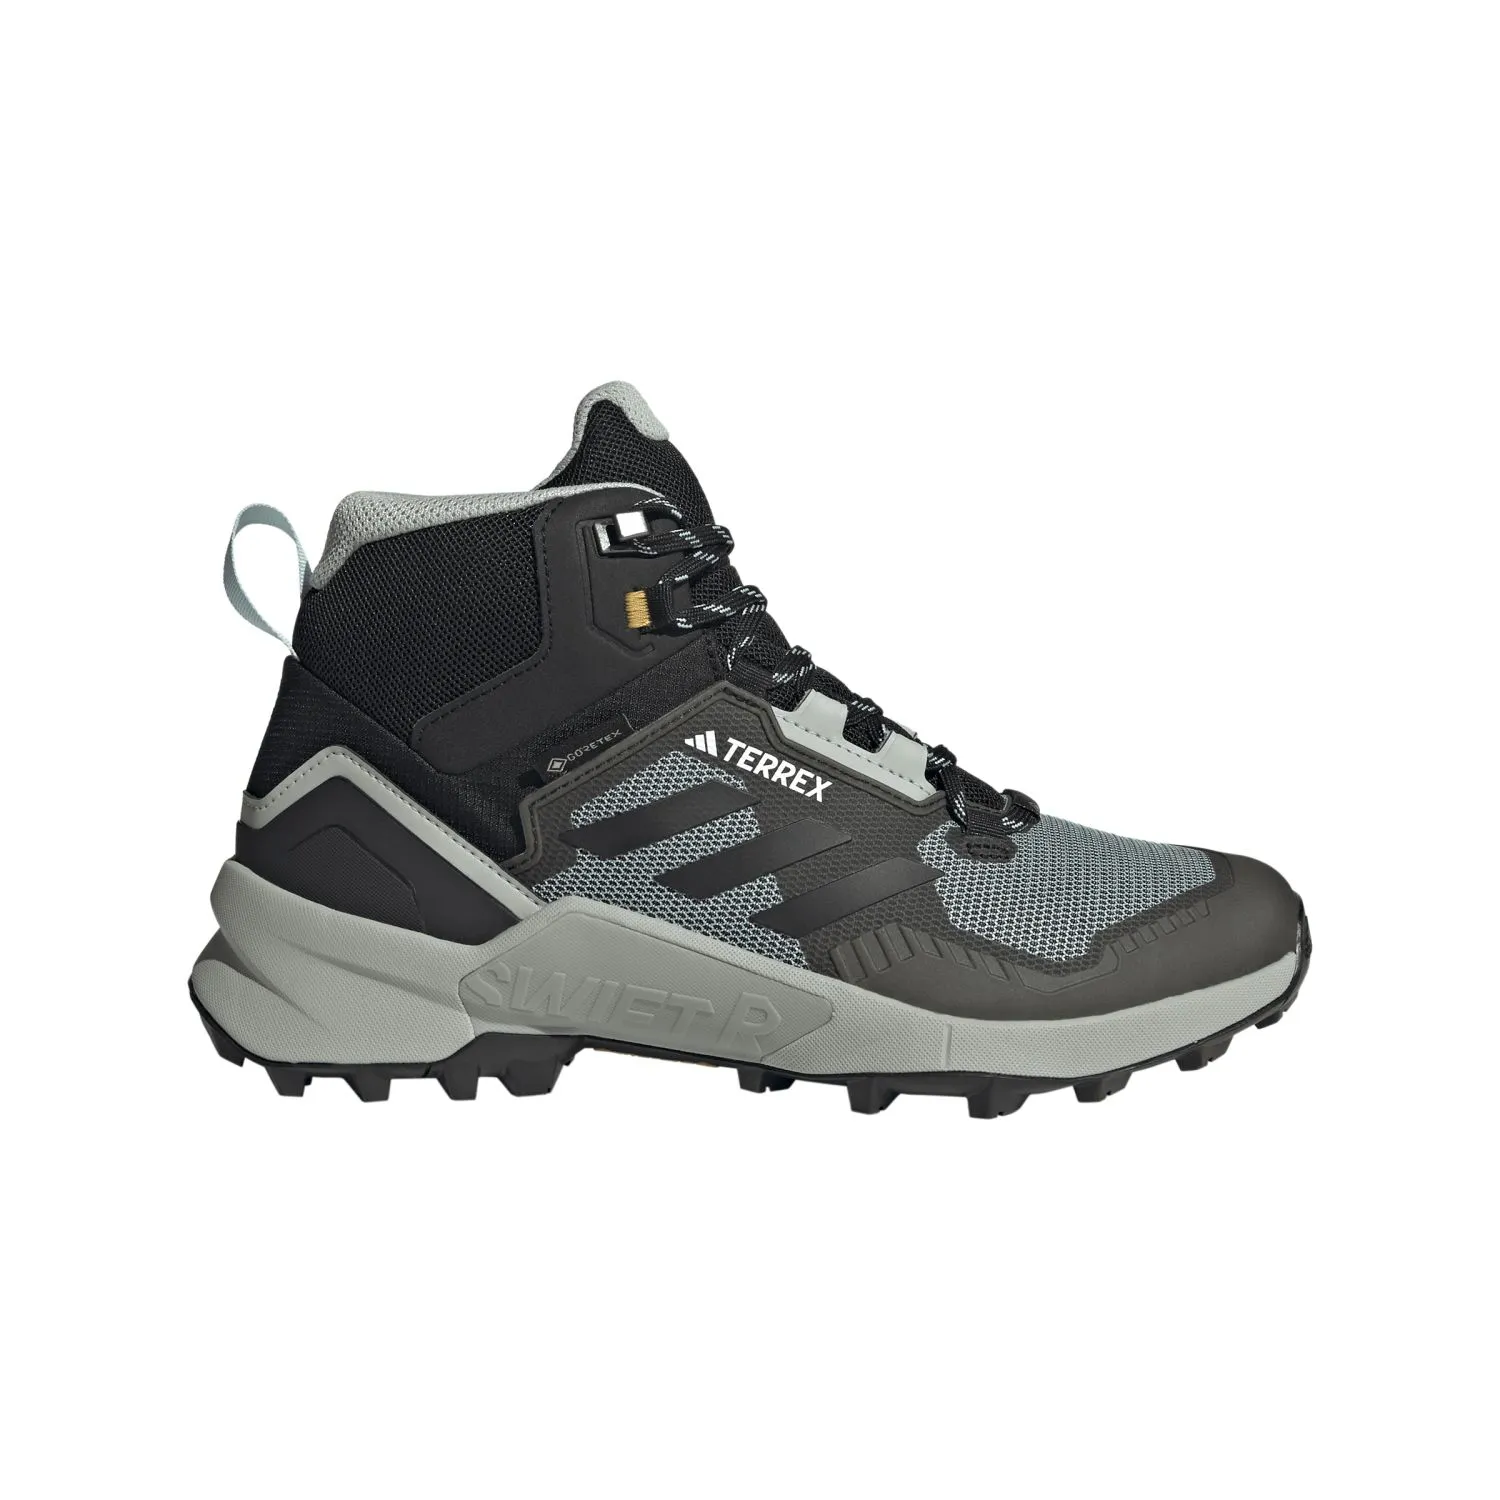 IF2401_1_FOOTWEAR_Photography_Side Lateral Center View_white.jpg